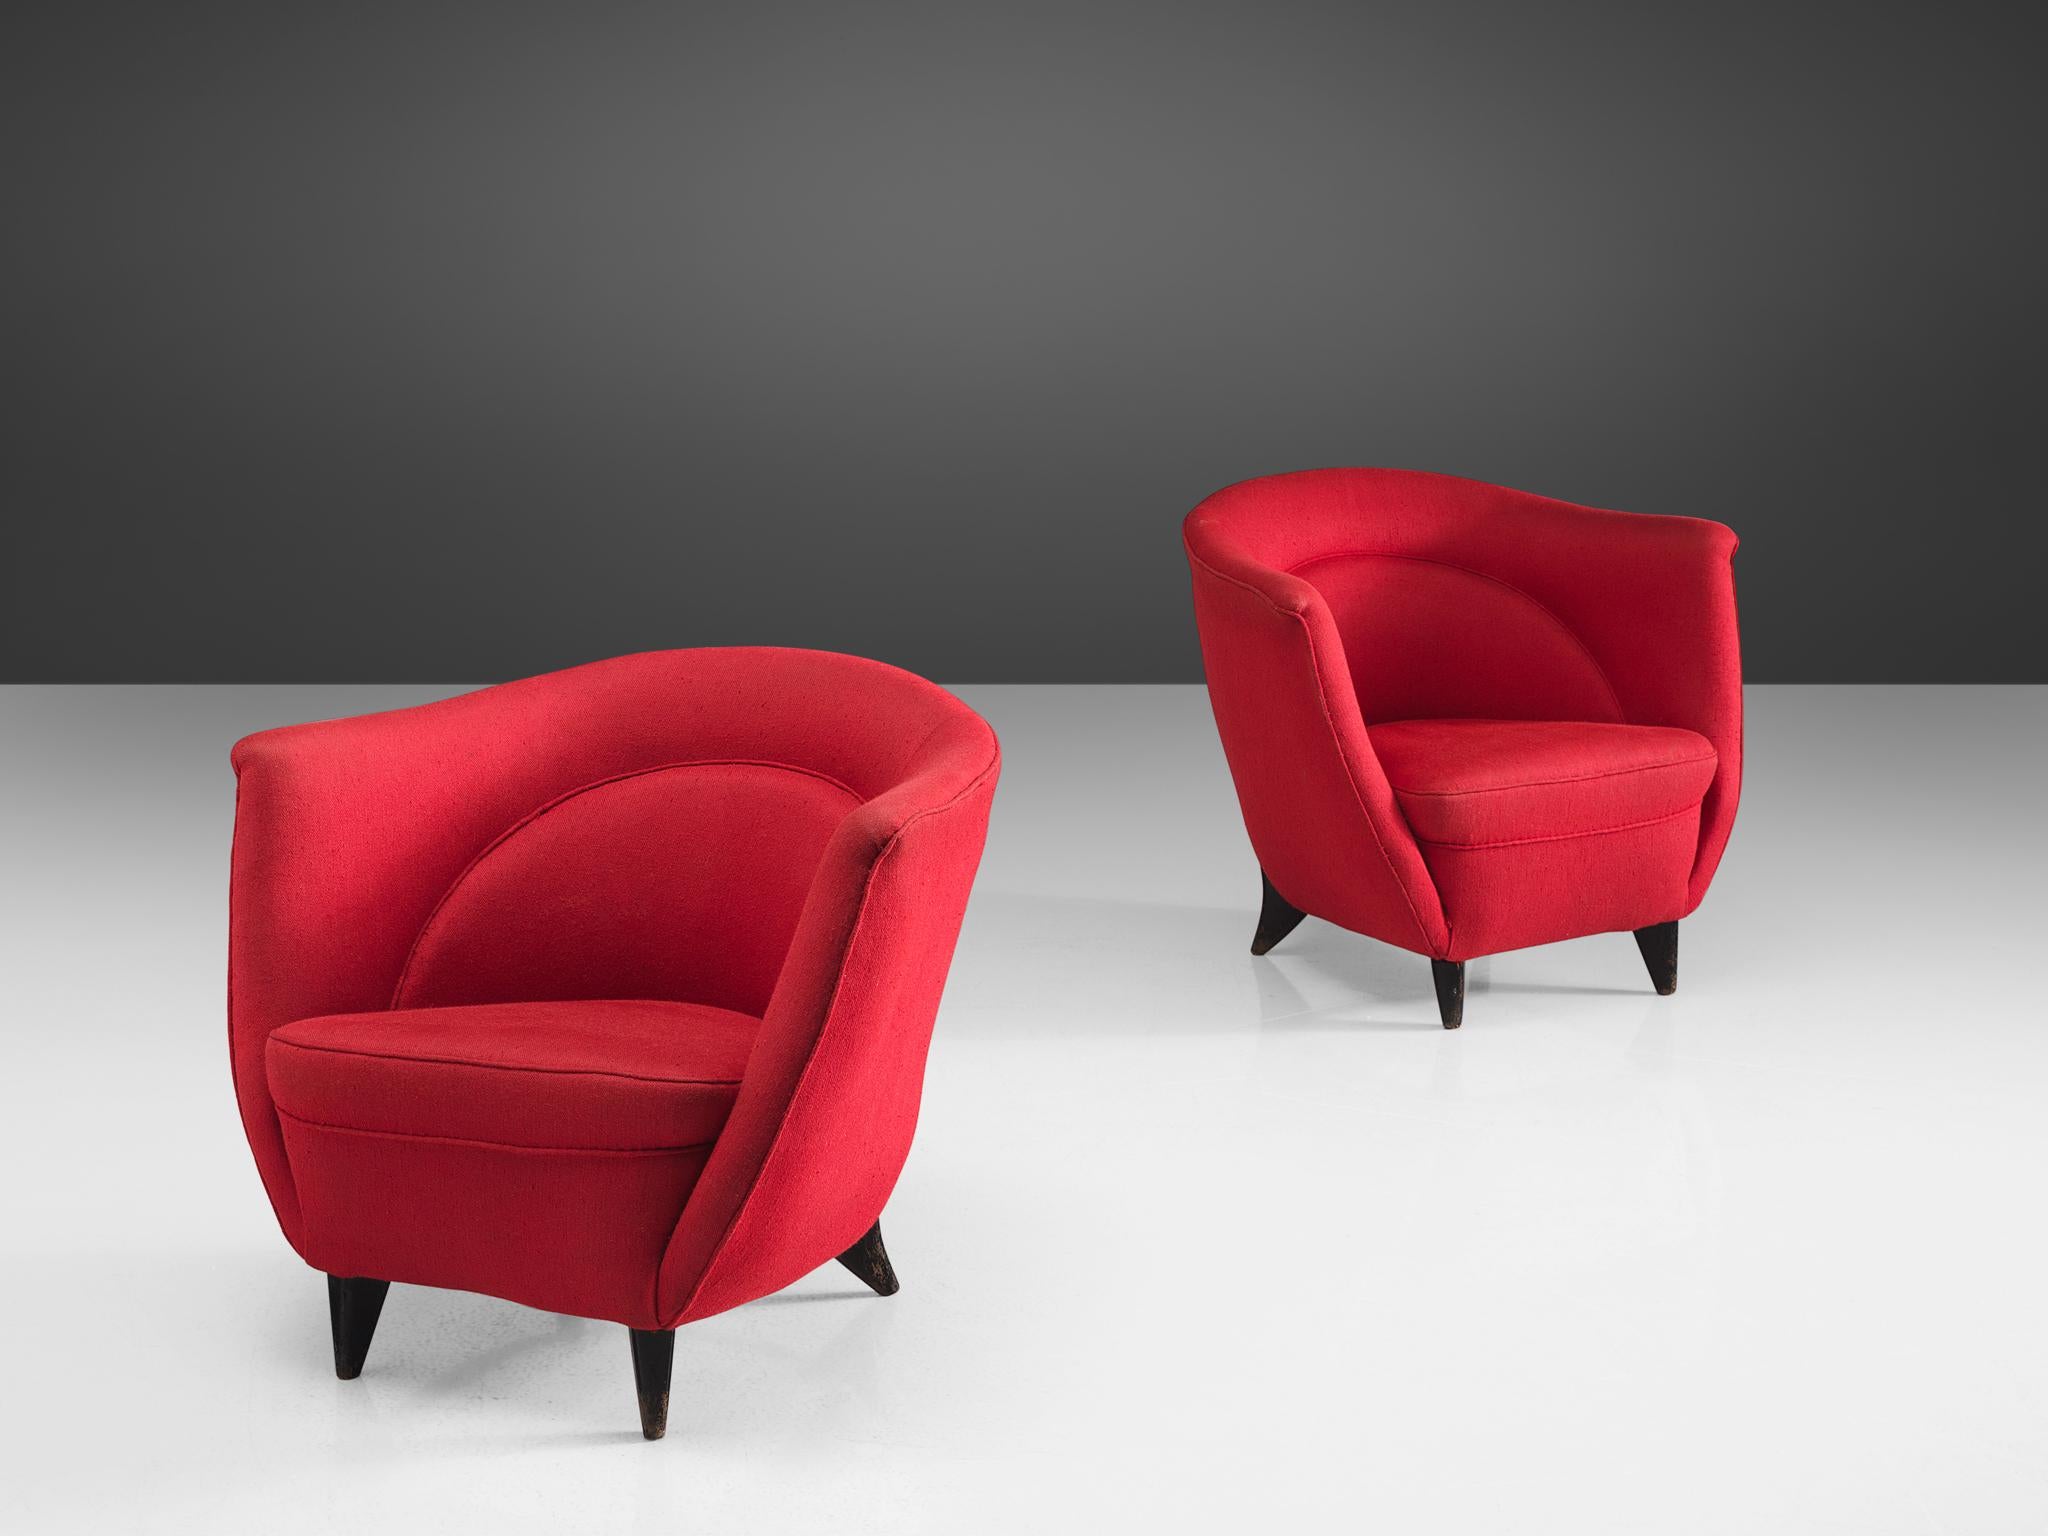 Guglielmo Veronesi, lounge chairs, red fabric, wood, Italy, 1950s.

These red chairs by Veronesi feature a high back with high armrests that are almost the same height as the back. As a result, this chair works as a type of shell that embraces the